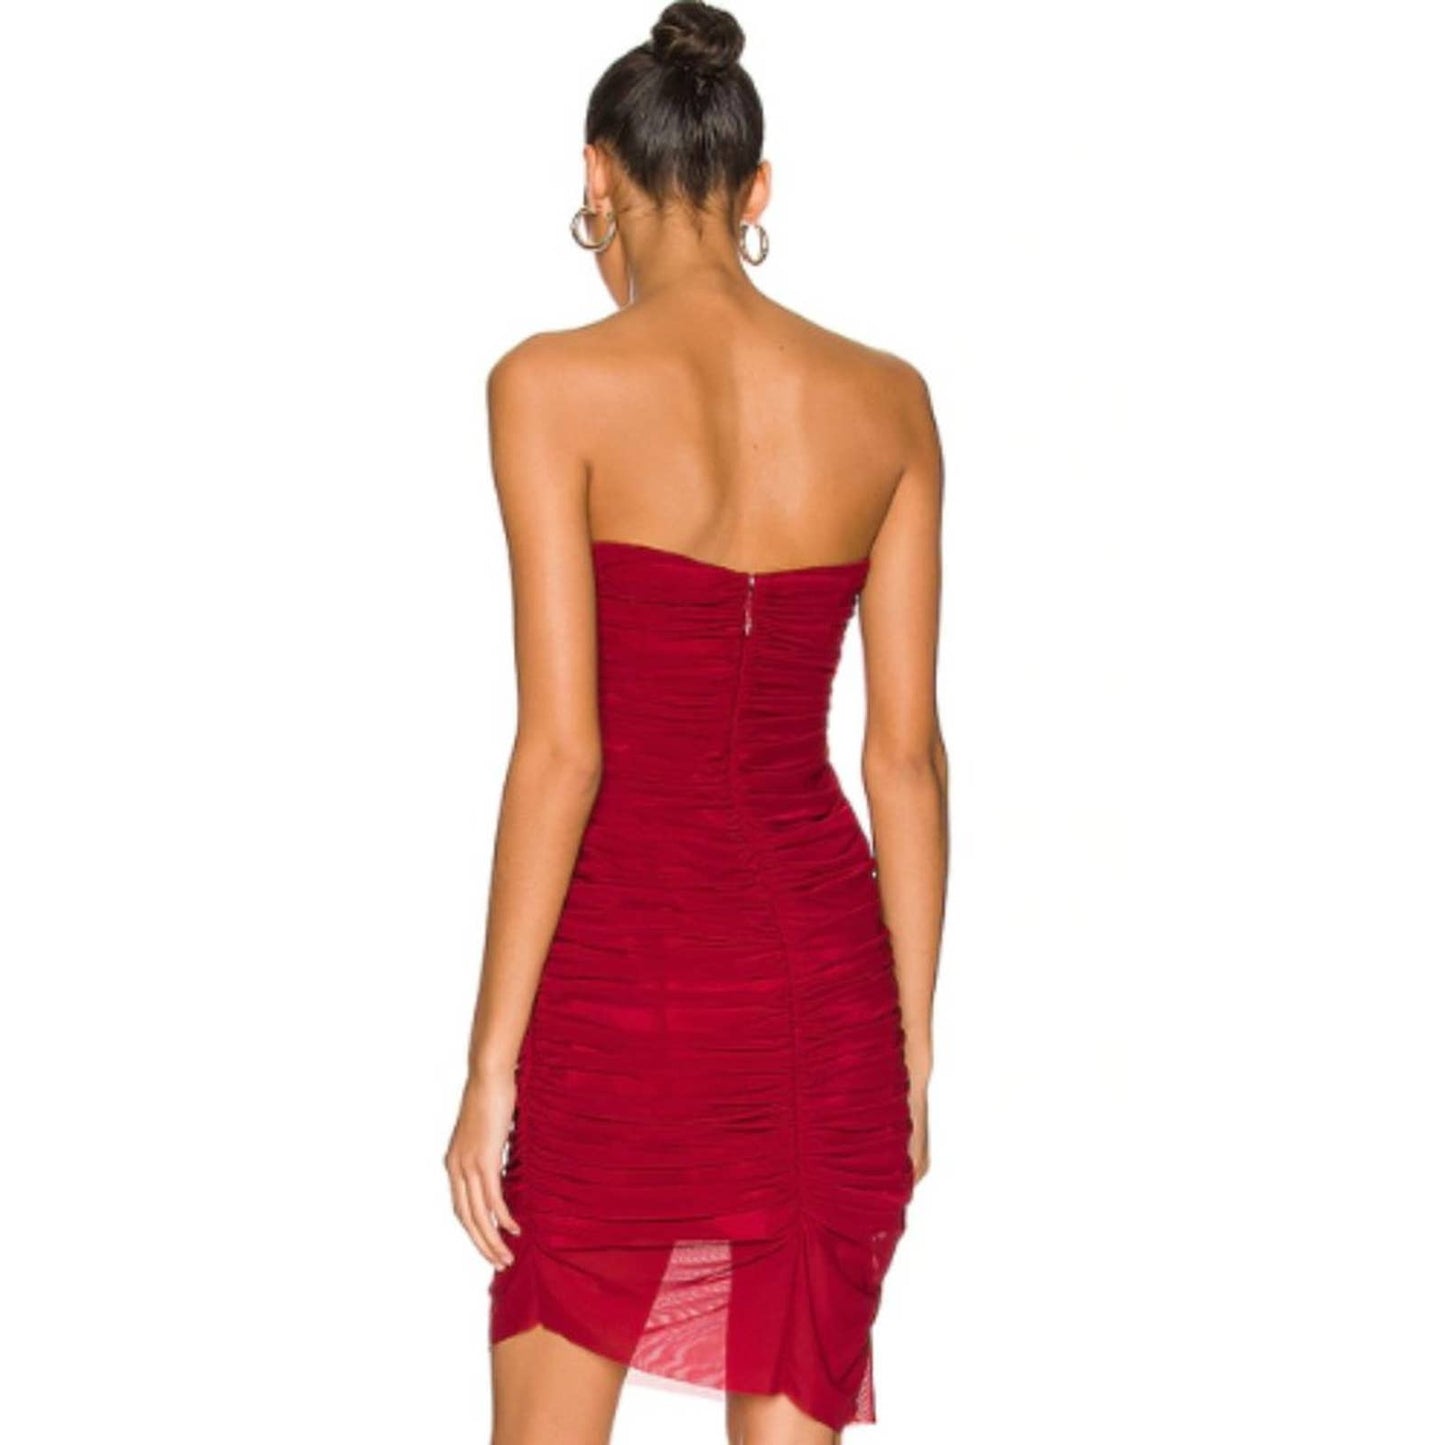 MAJORELLE Ursula Dress in Red Wine NWT Size Small